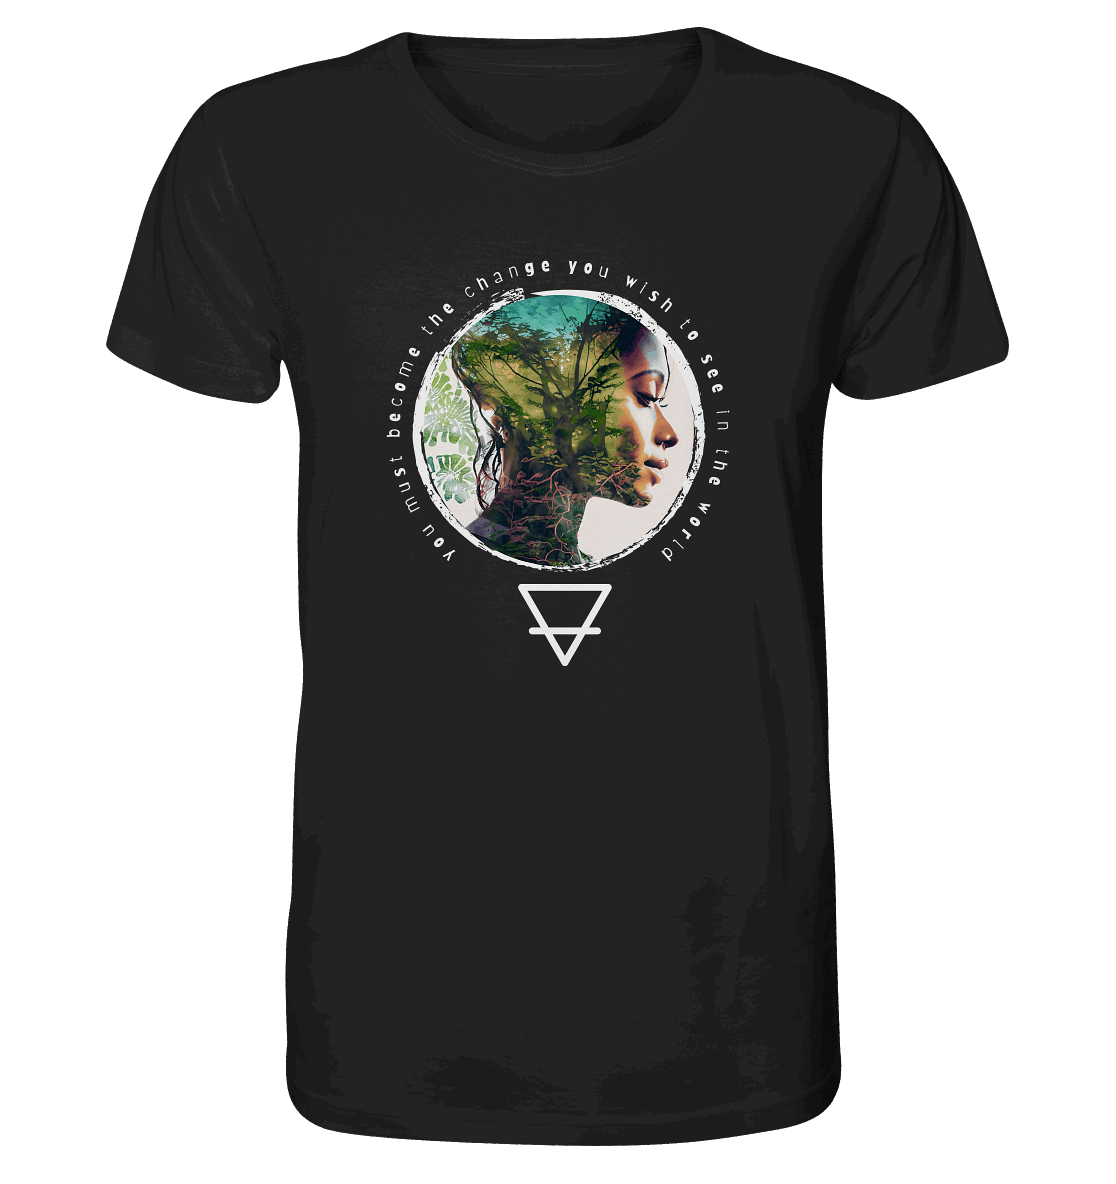 Nature - You must become the change you wish to see in the world - Organic Shirt